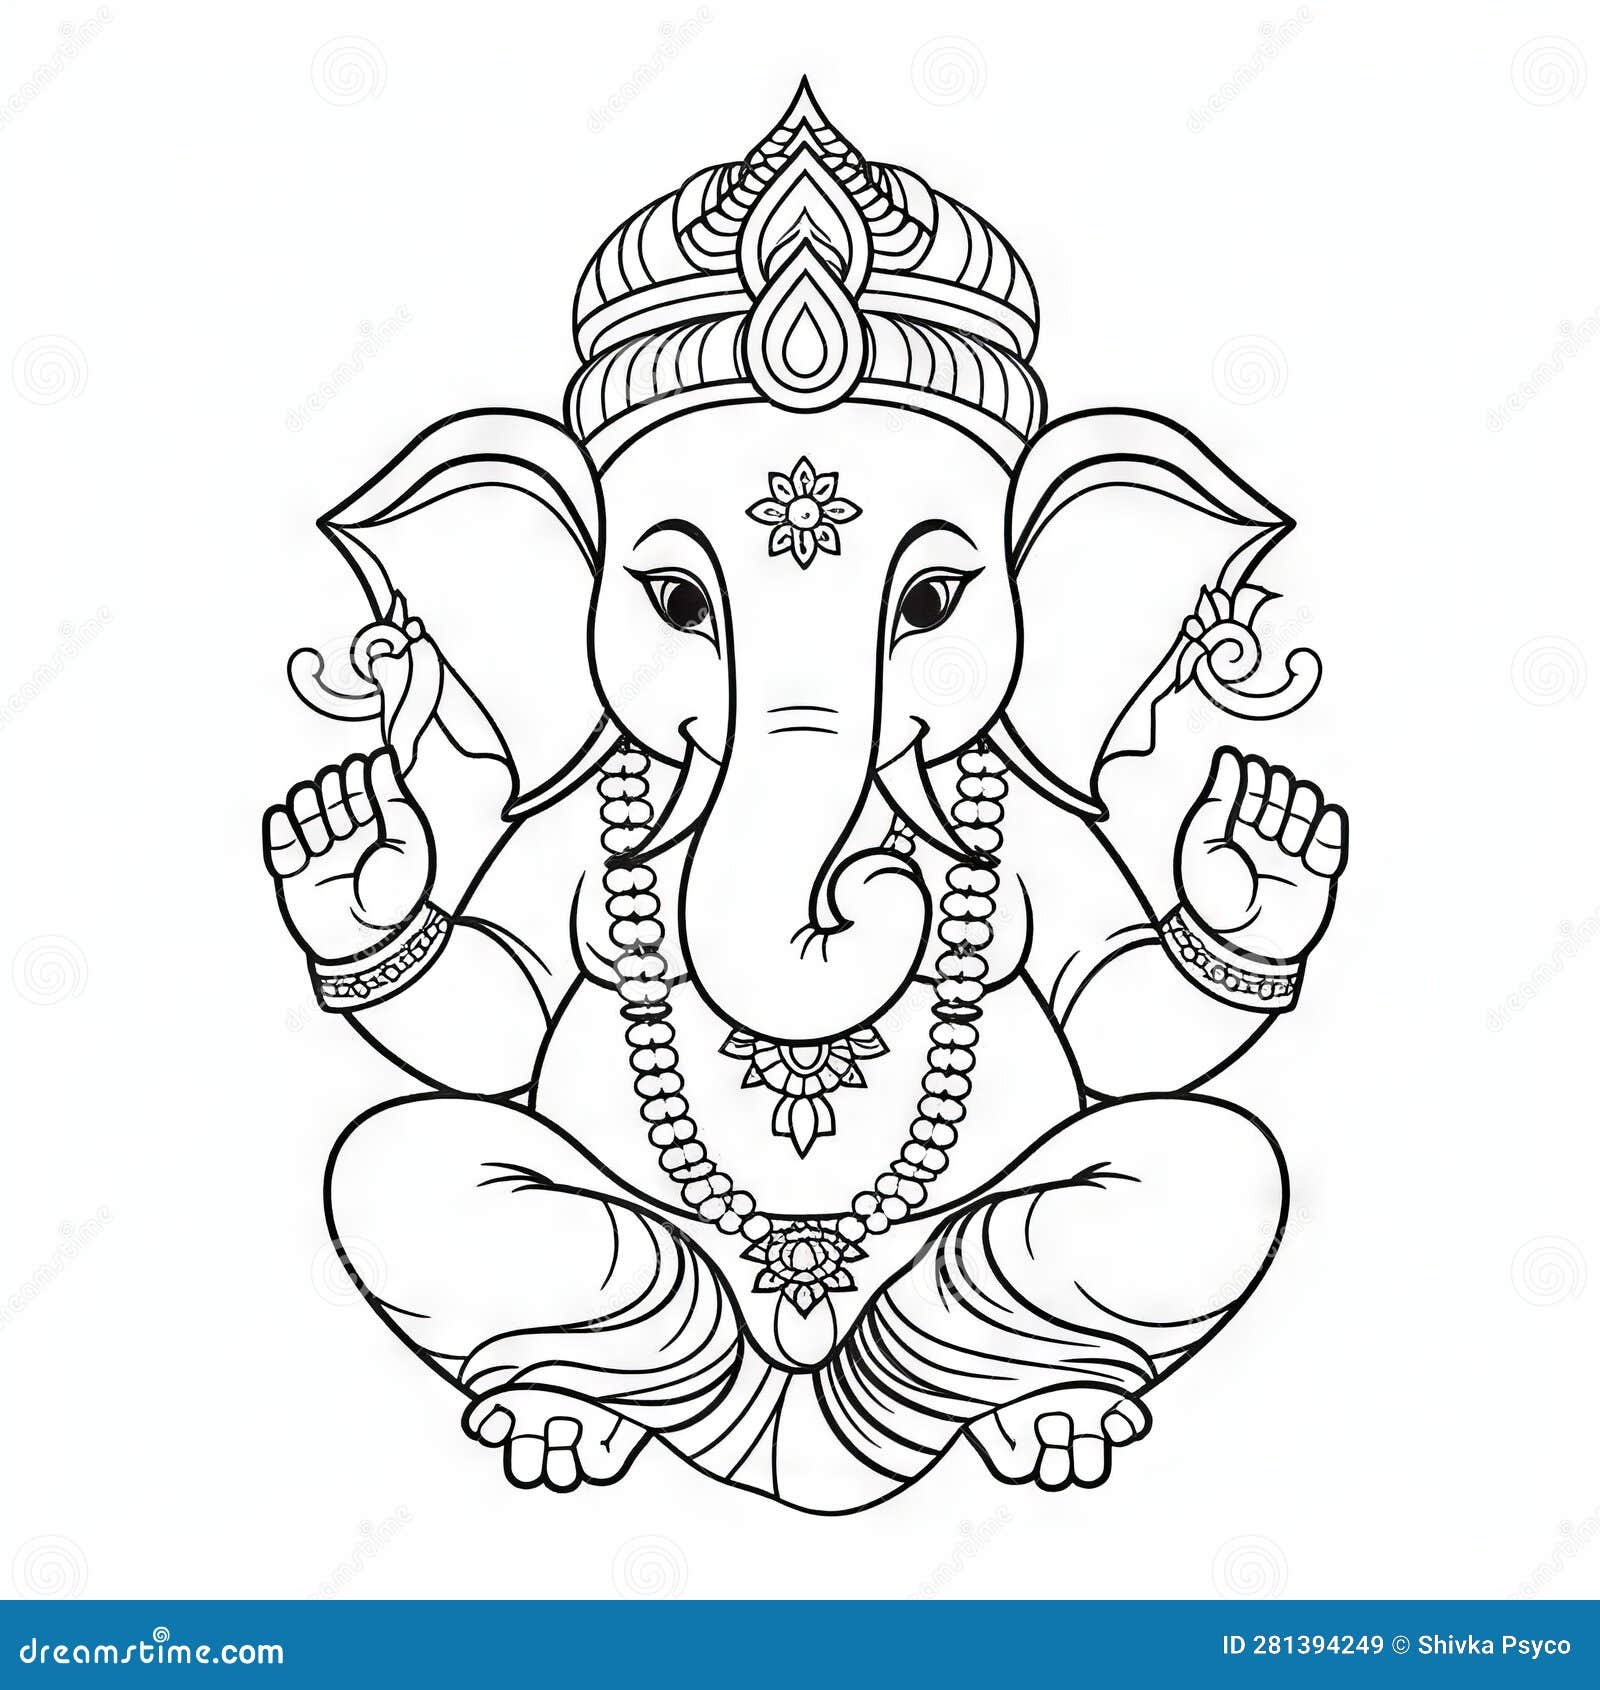 Update more than 56 easy ganpati drawing for kids latest